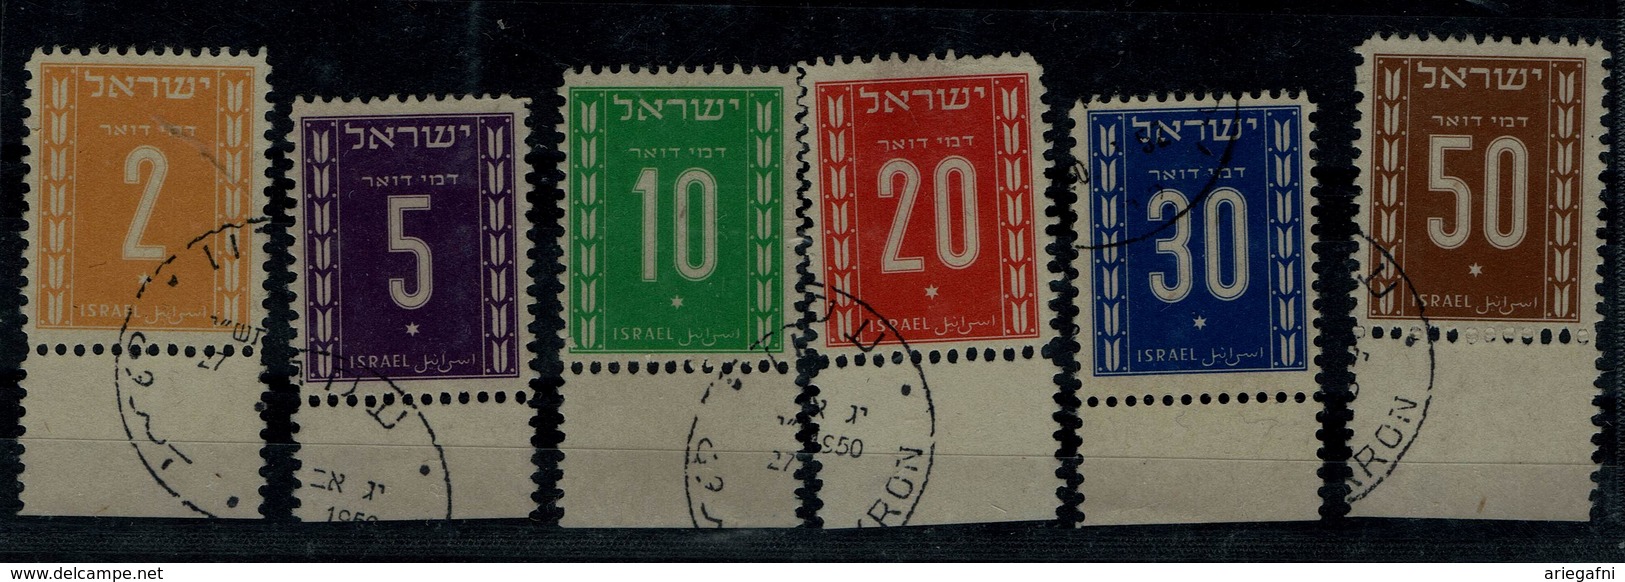 ISRAEL 1949 2nd POSTAGE DUE WITH TABS USED VF!! - Used Stamps (with Tabs)